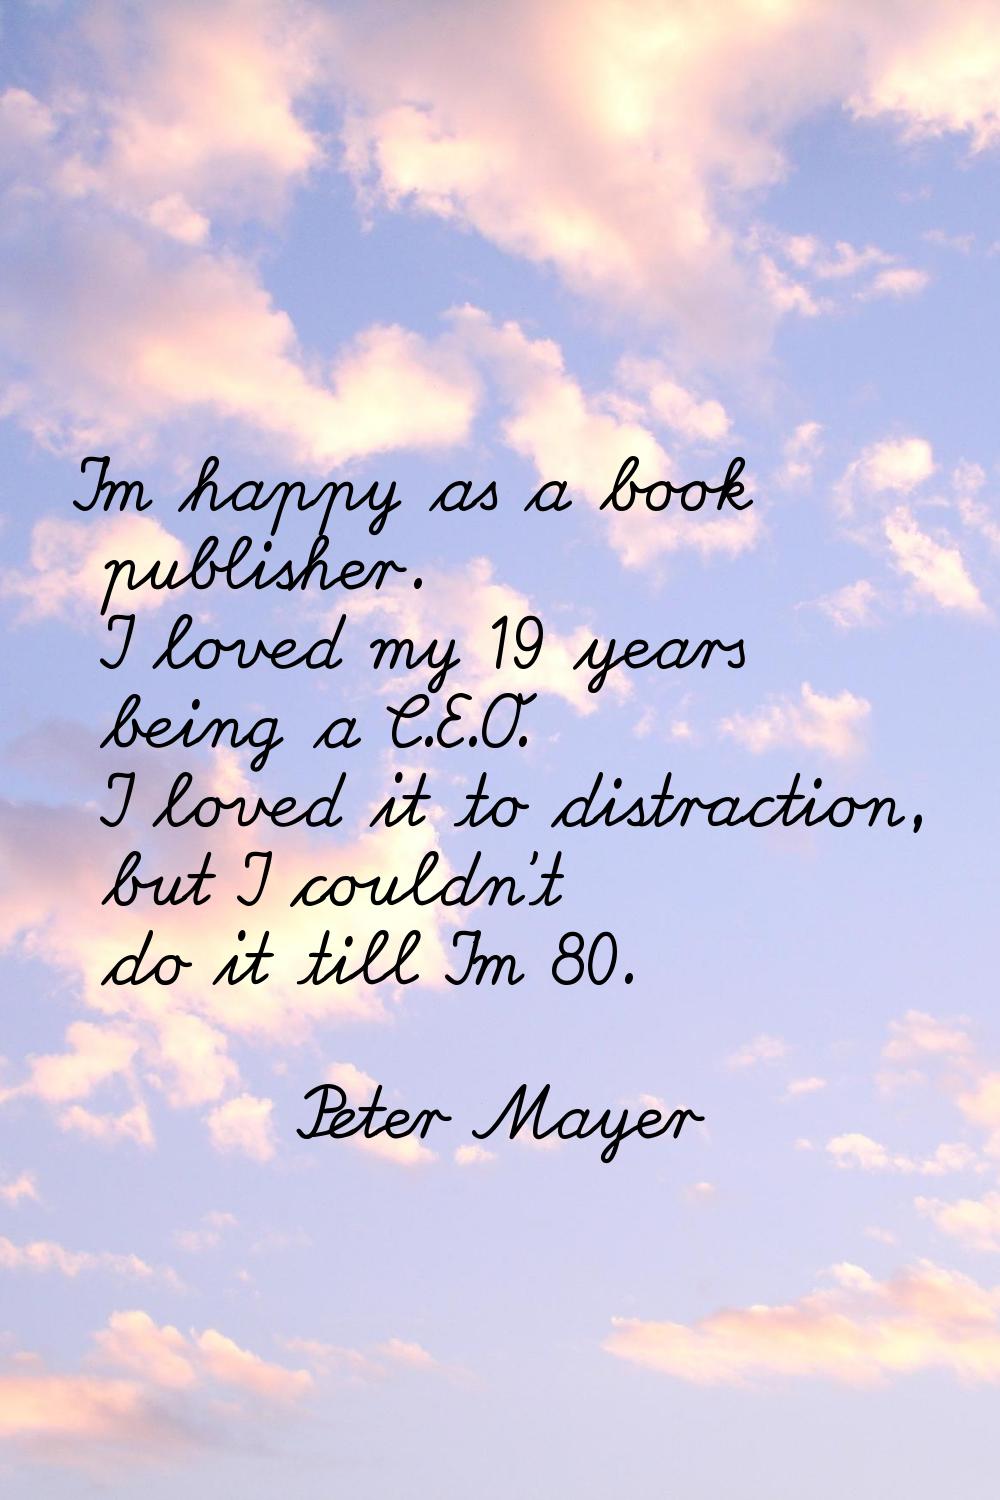 I'm happy as a book publisher. I loved my 19 years being a C.E.O. I loved it to distraction, but I 